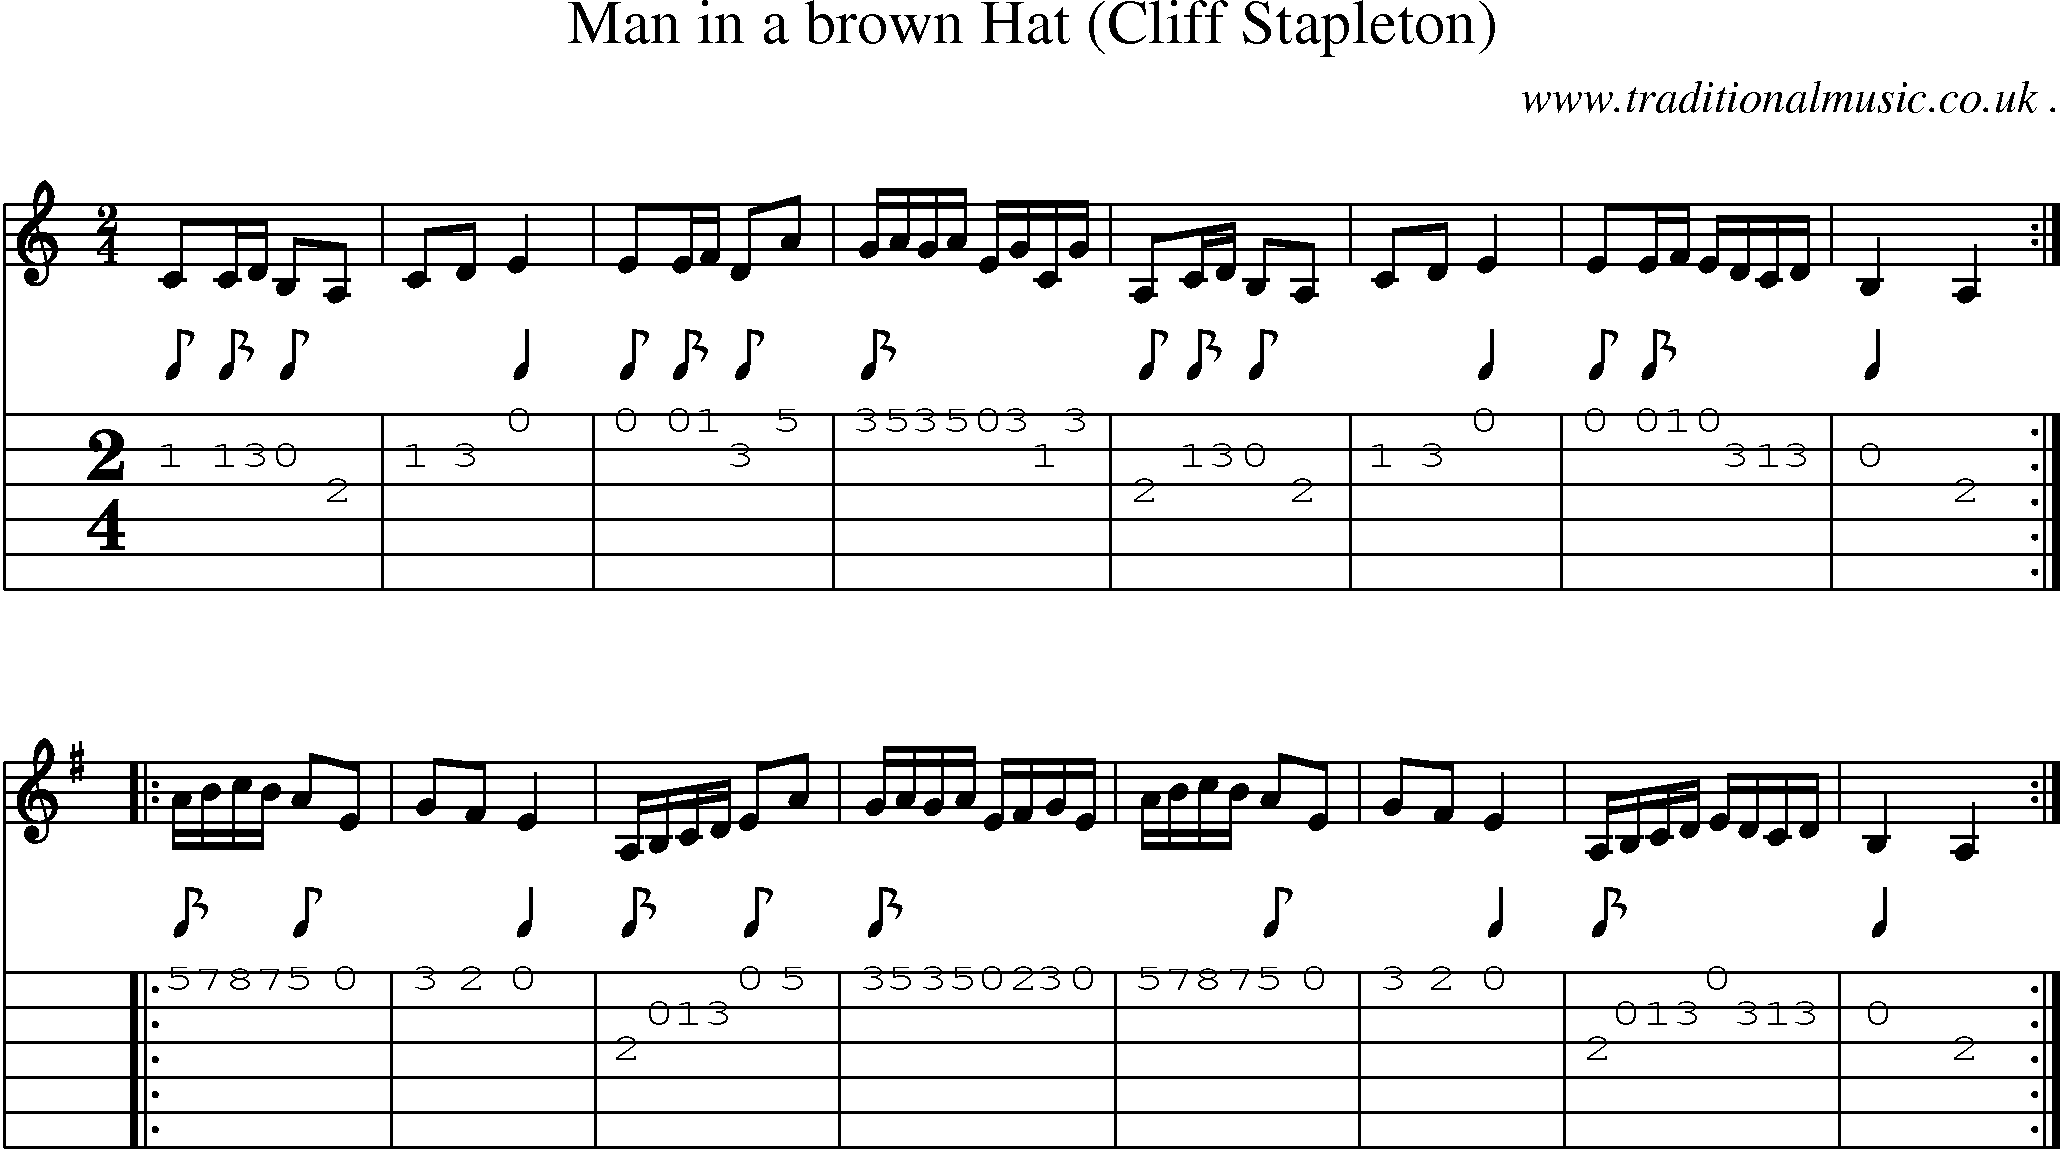 Sheet-Music and Guitar Tabs for Man In A Brown Hat (cliff Stapleton)